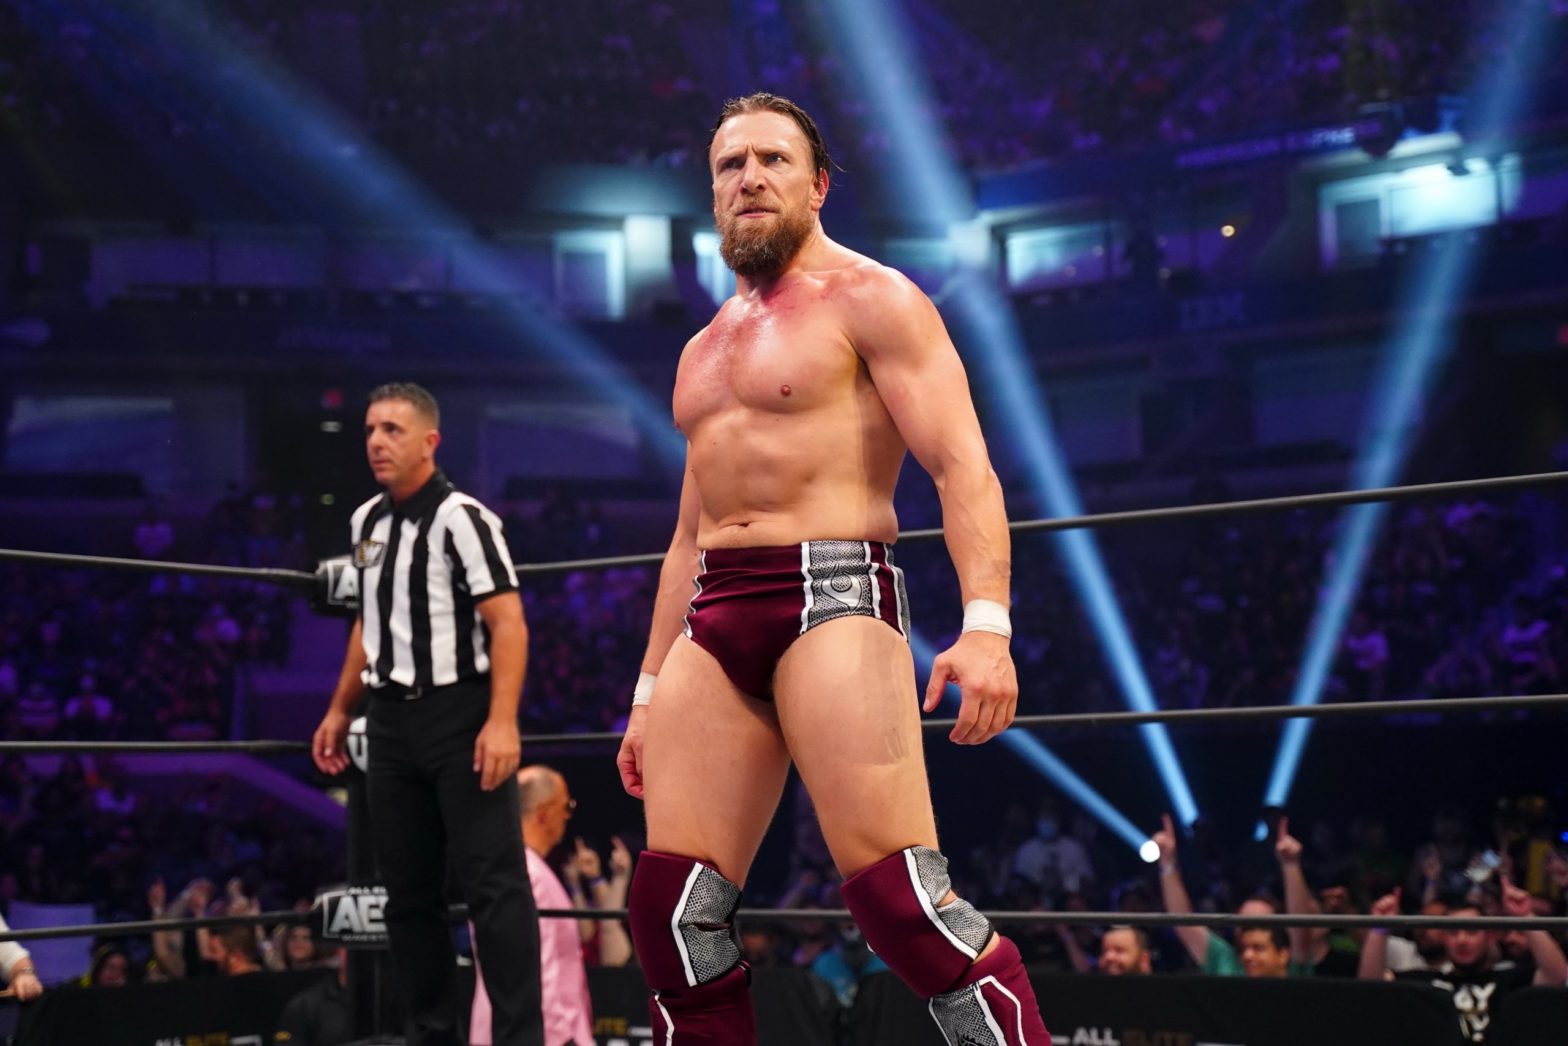 Bryan Danielson Reveals Pro Wrestling Legends He Wishes He Could Have Wrestled